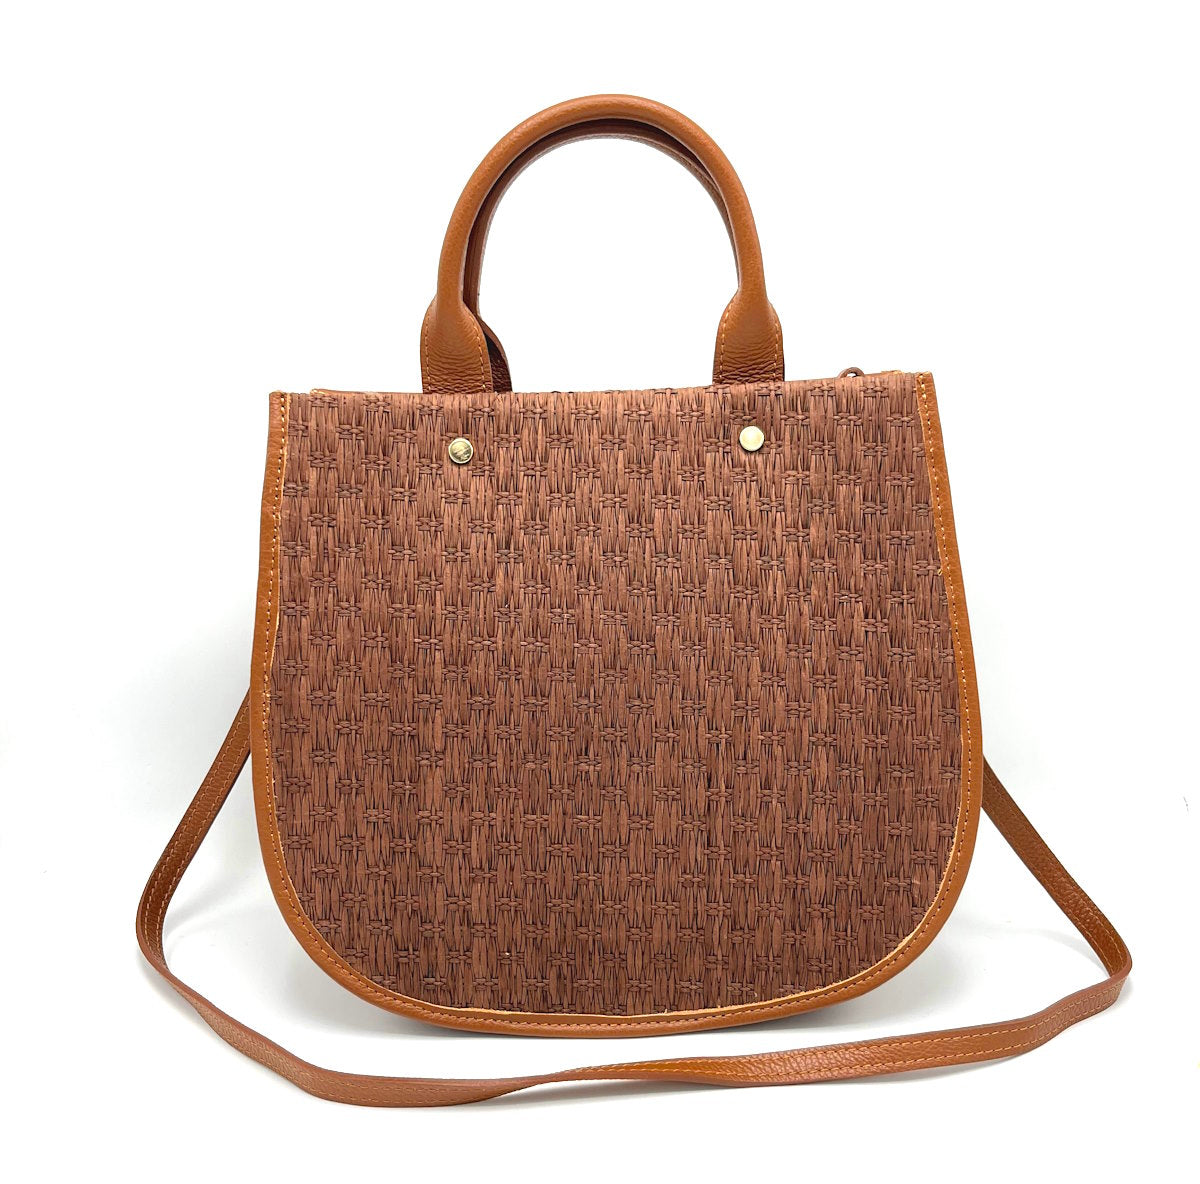 Genuine leather and straw bag, Made in Italy, art. 112464